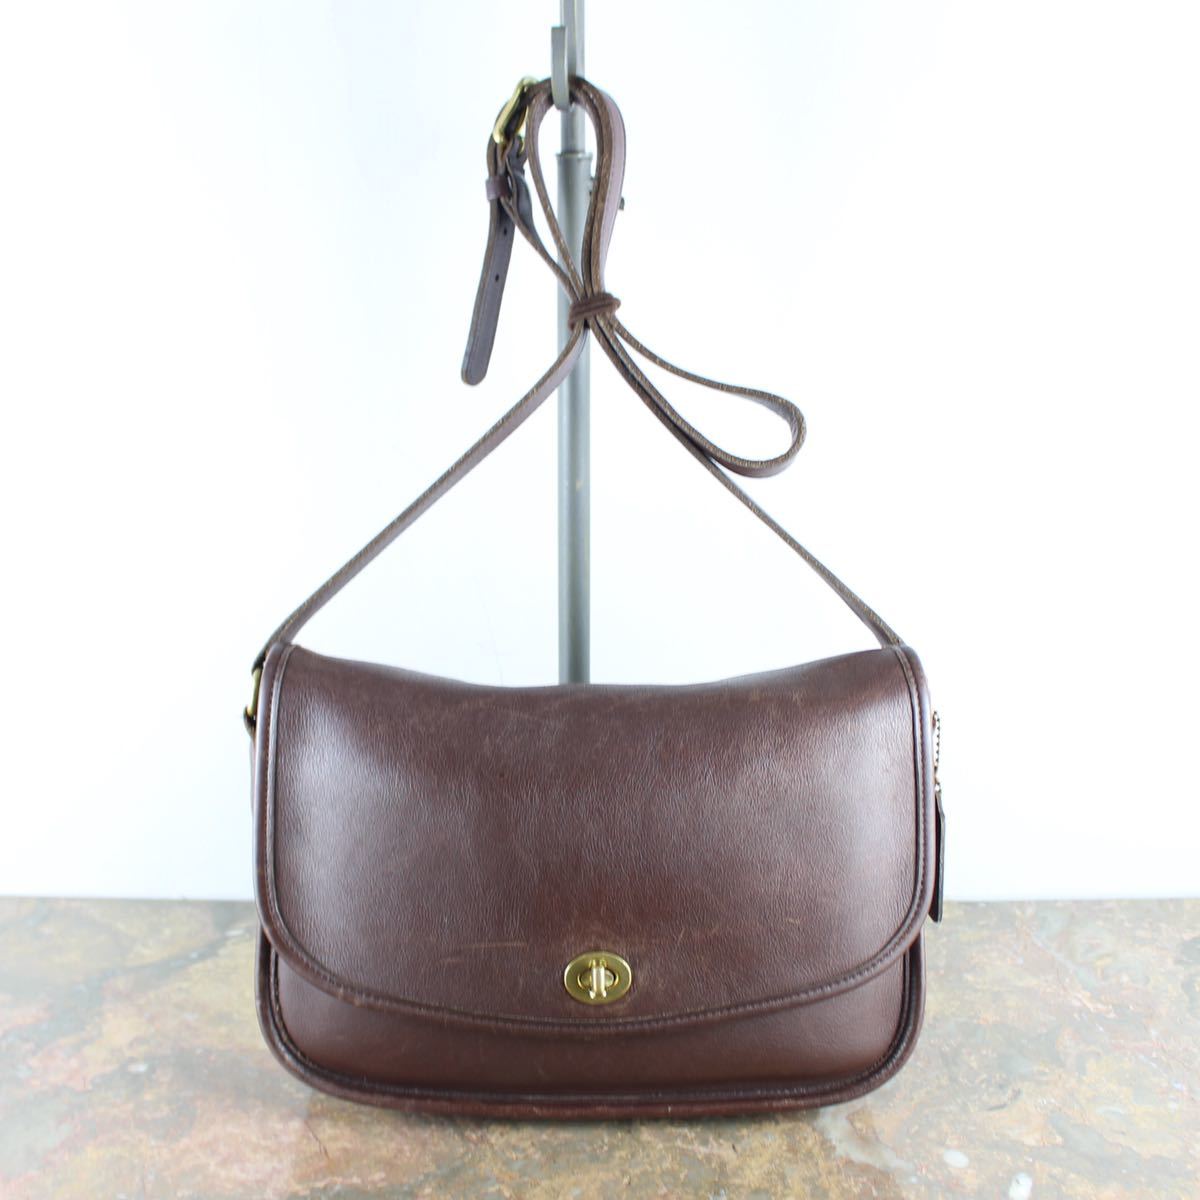 OLD COACH TURN LOCK LEATHER SHOULDER BAG MADE IN MEXICO/オールドコーチターンロックレザーショルダーバッグ